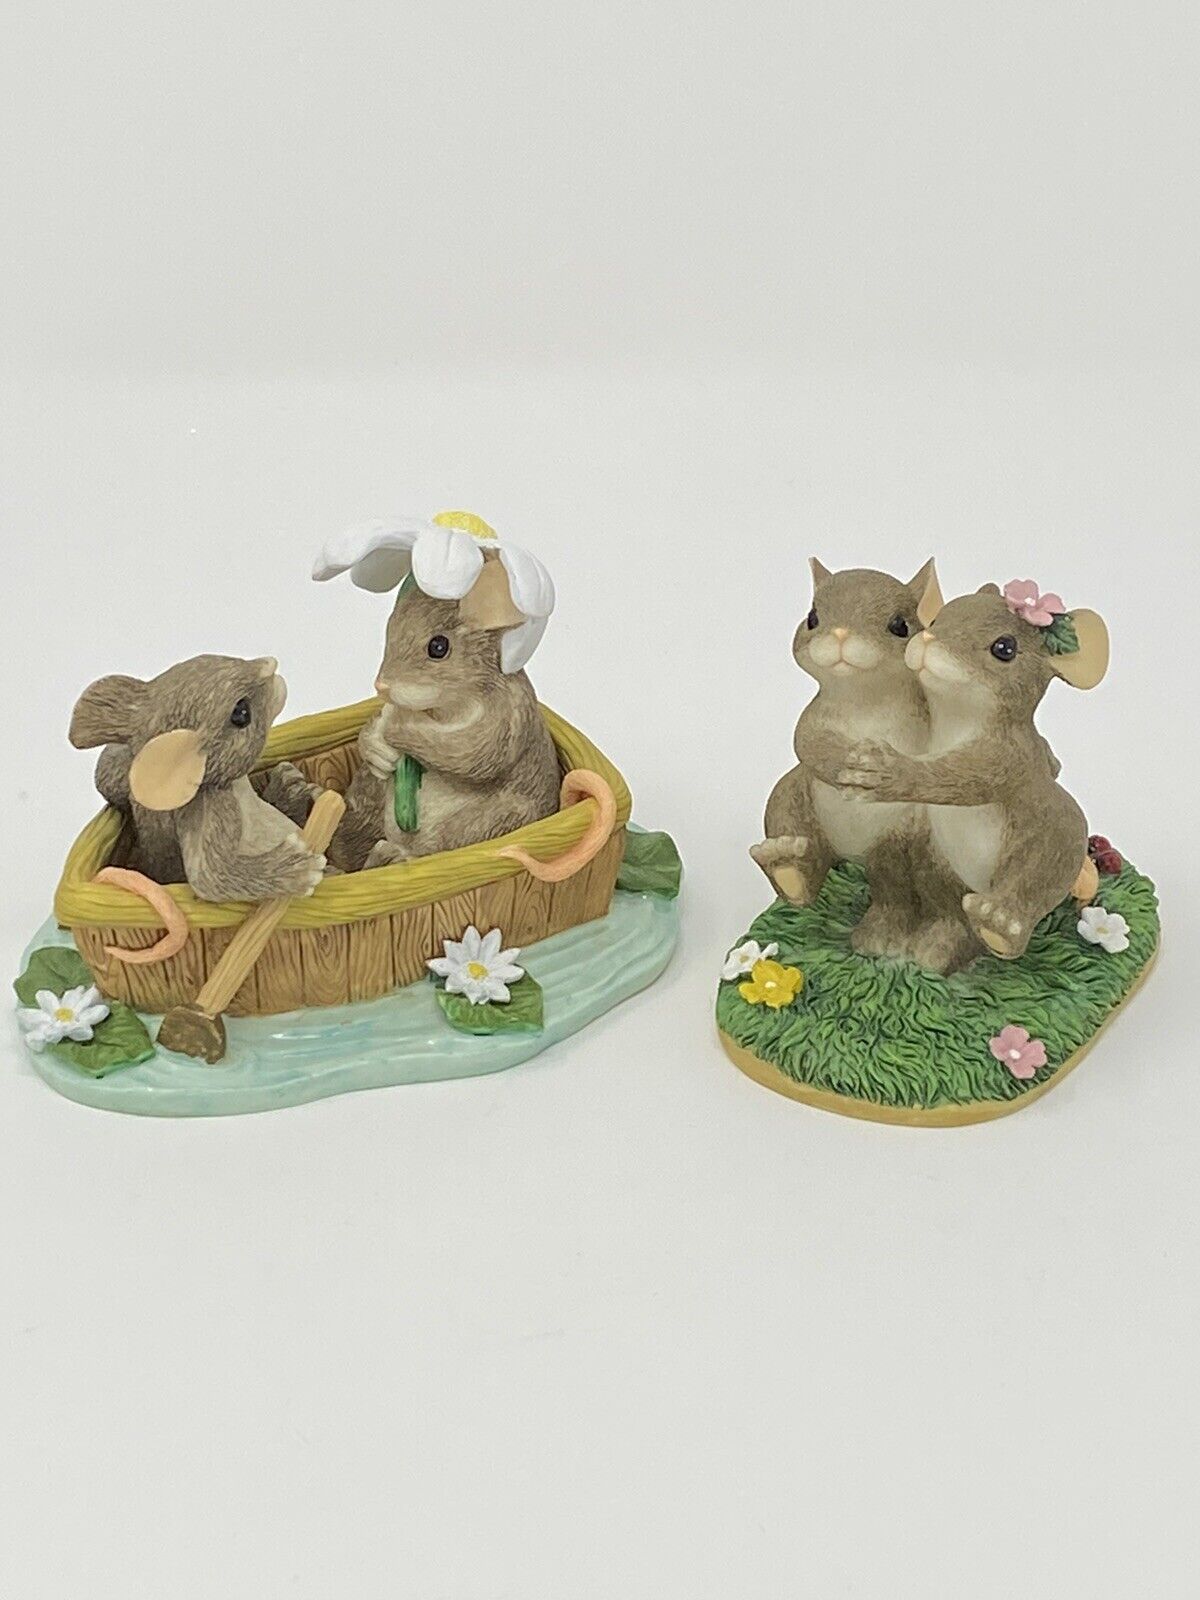 Charming Tails It Takes Two To Tango & Rowboat Romance Figurines Set Of Two